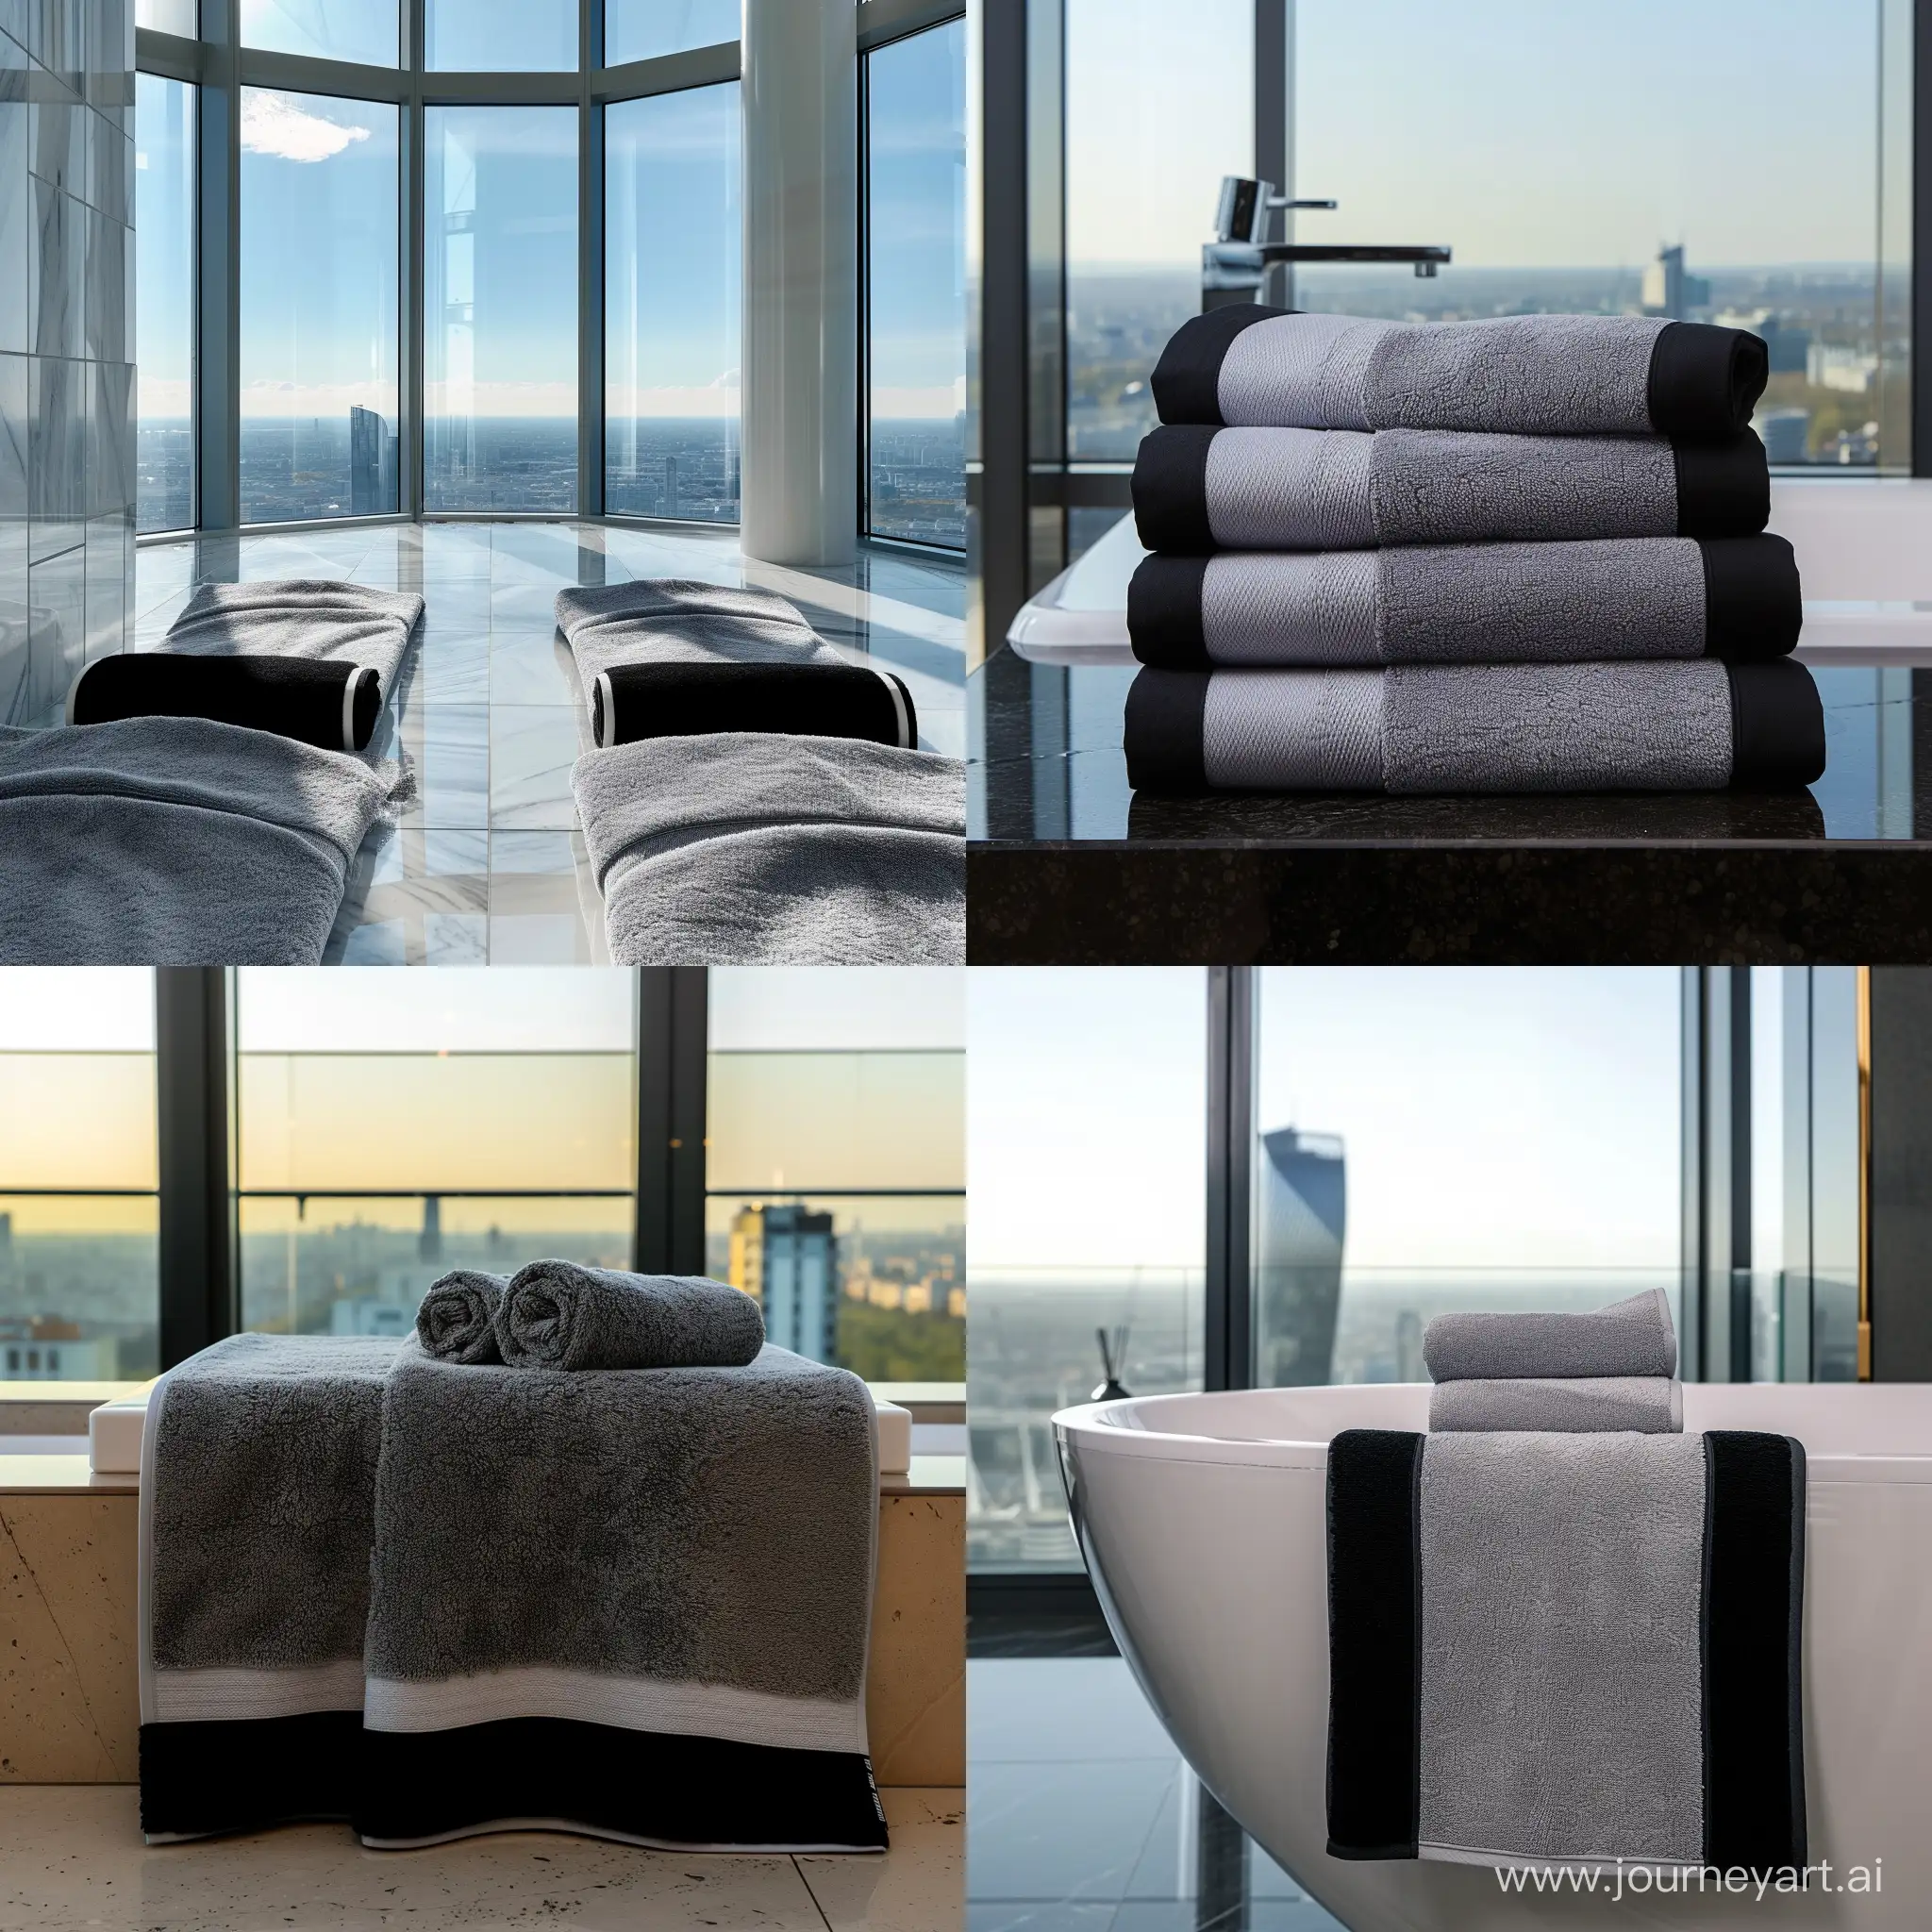 Luxurious-Grey-and-Black-Bath-Towels-in-Expansive-Apartment-with-Panoramic-Views